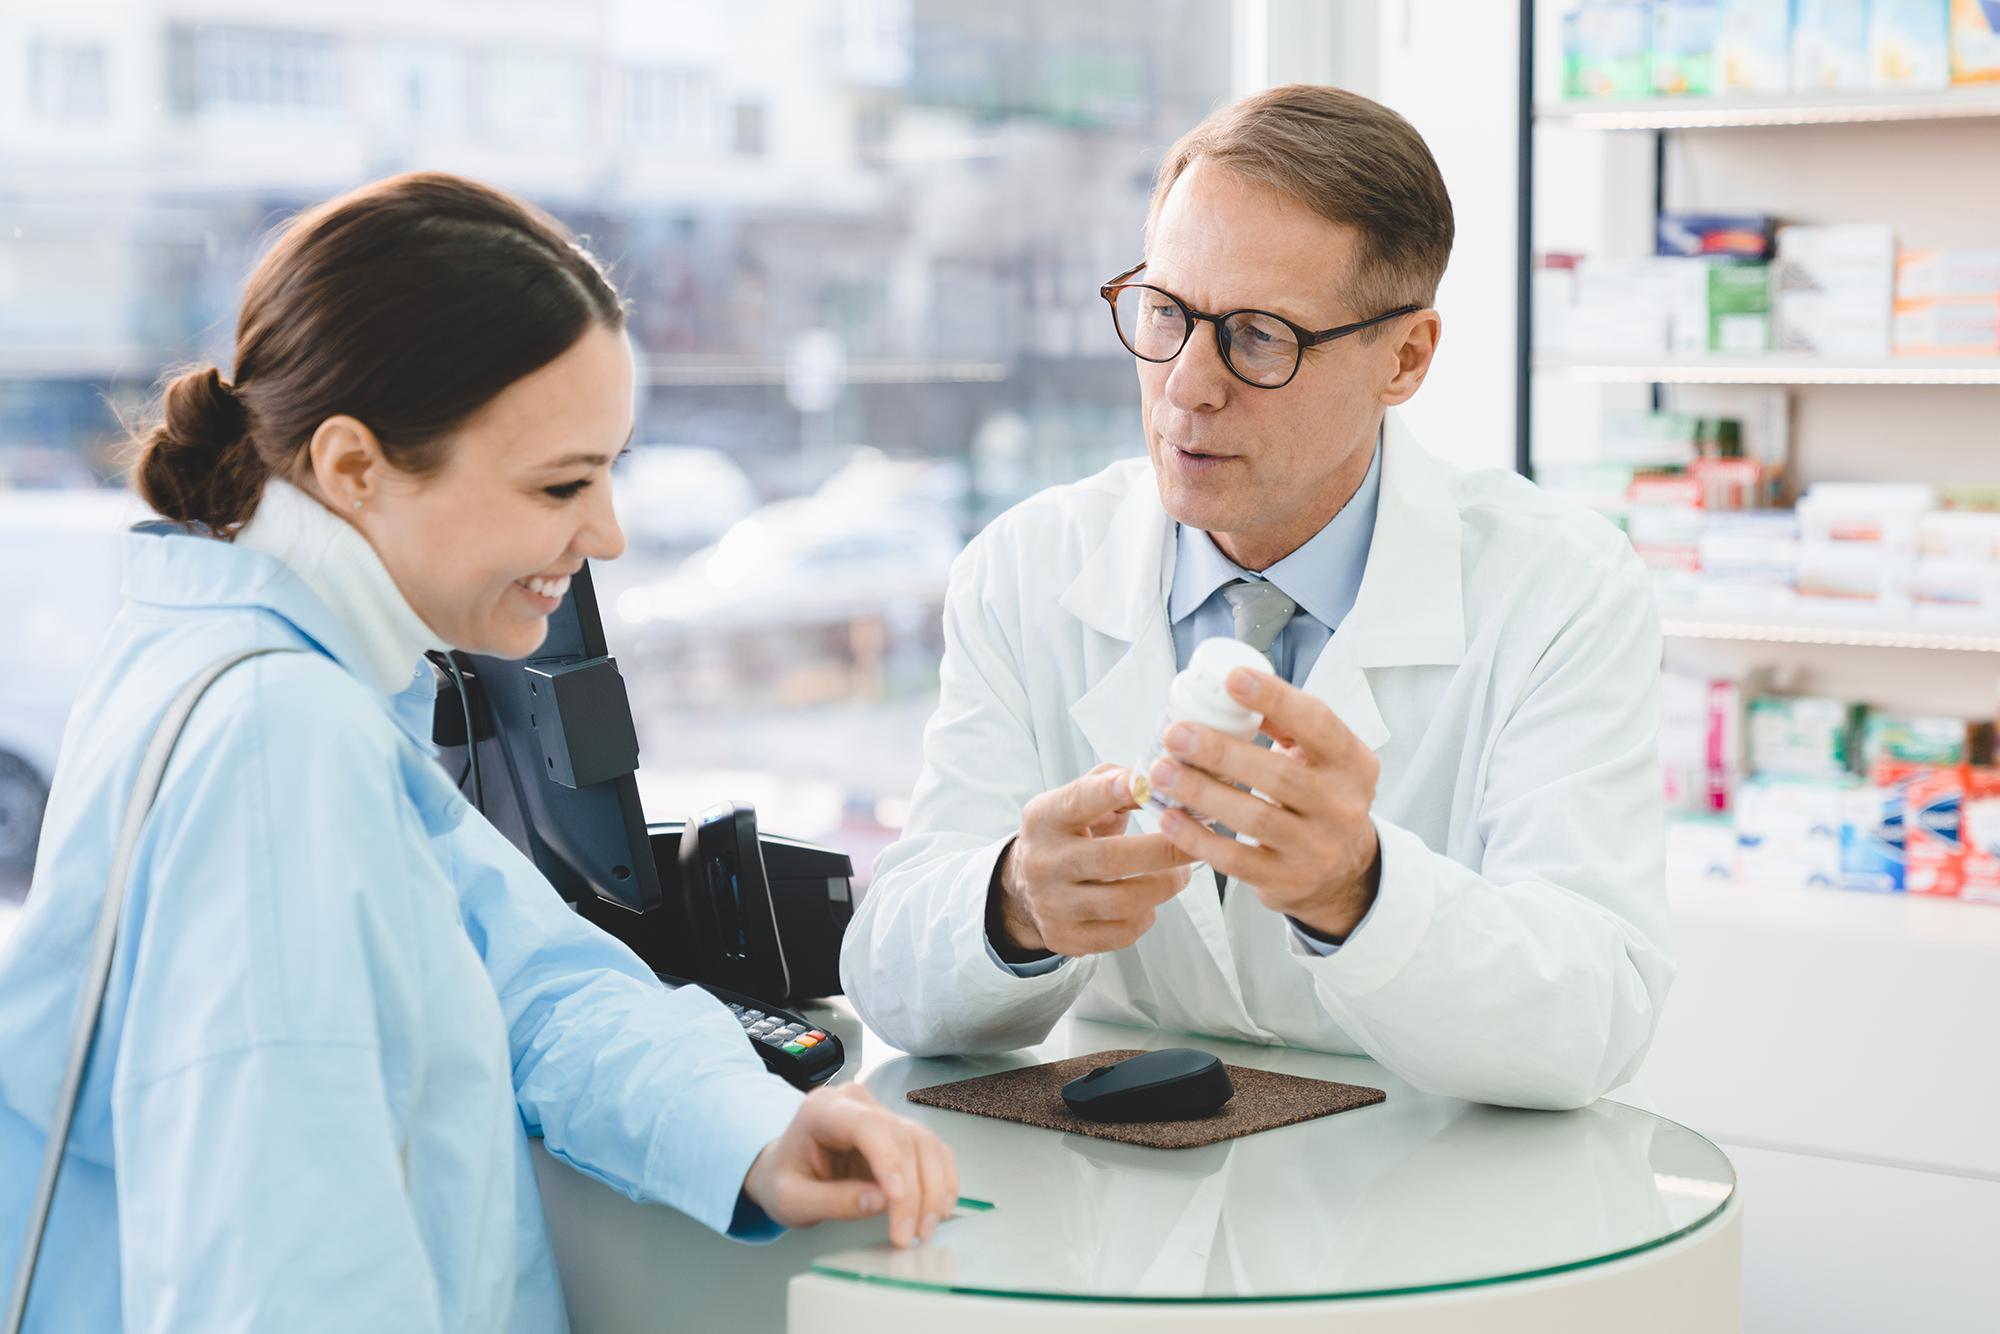 A pharmacist talking to a customer about their medication